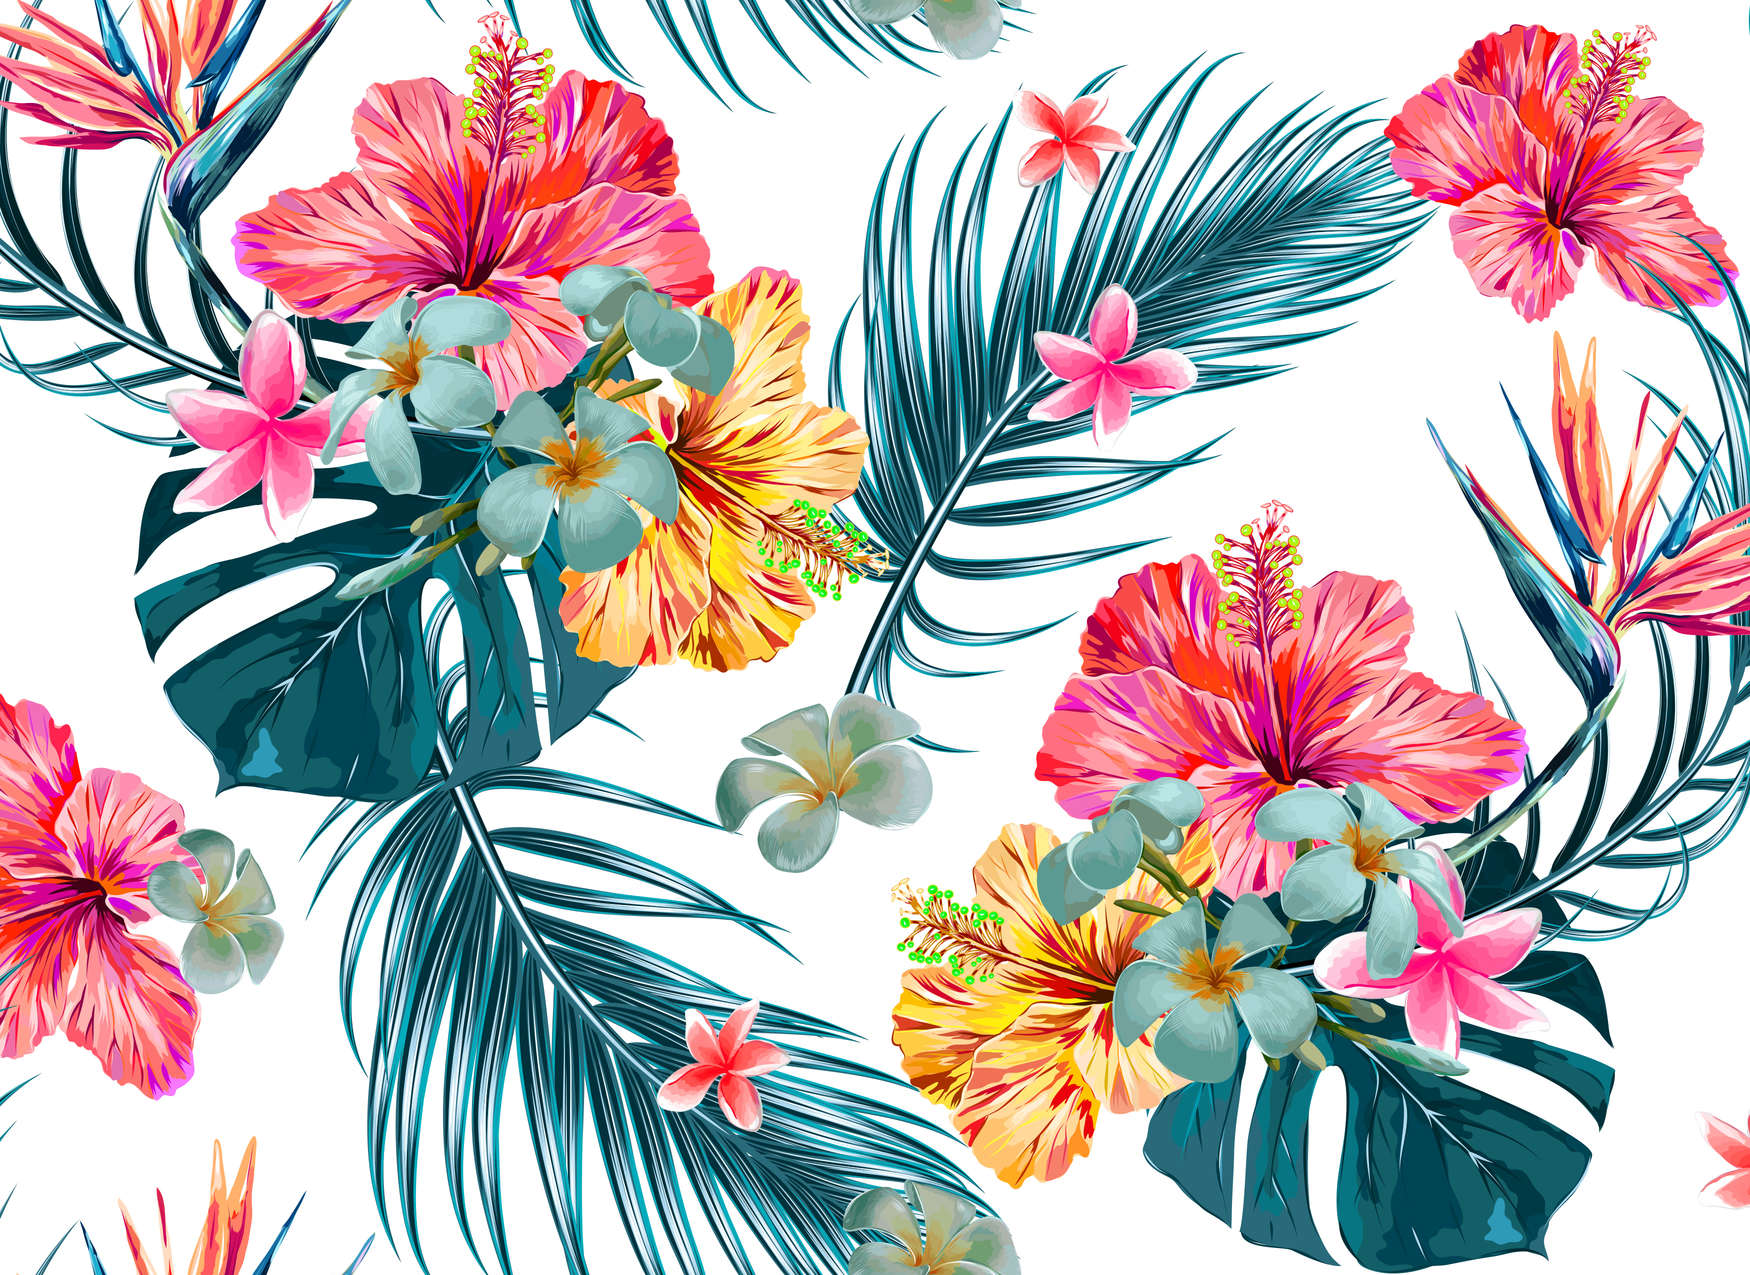             Photo wallpaper with colourful tropical plants - Colourful, Green
        